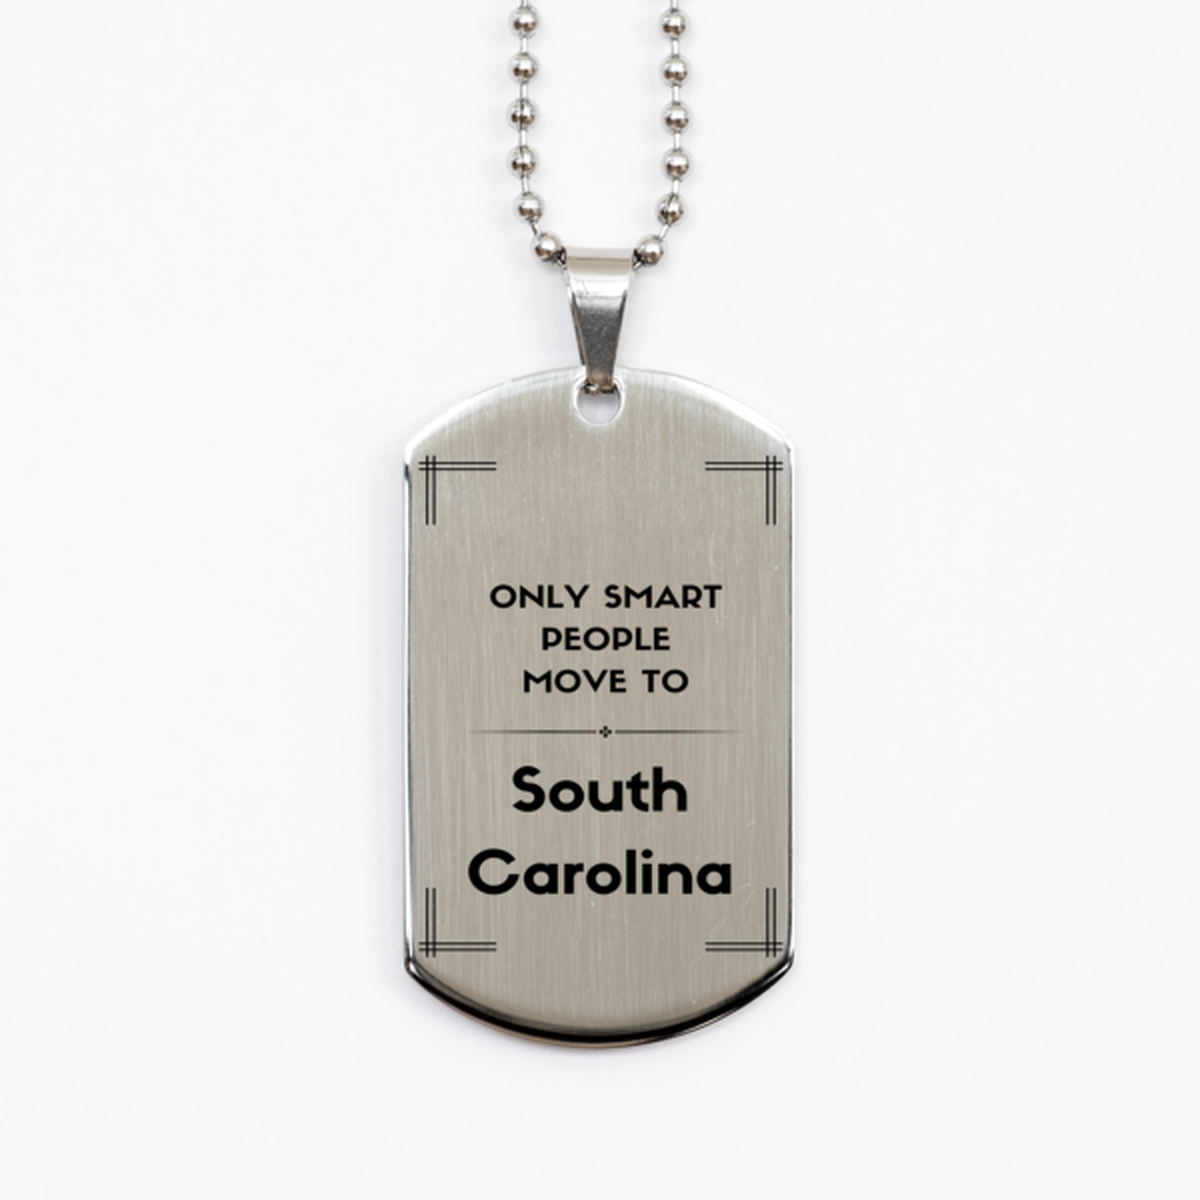 Only smart people move to South Carolina Silver Dog Tag, Gag Gifts For South Carolina, Move to South Carolina Gifts for Friends Coworker Funny Saying Quote